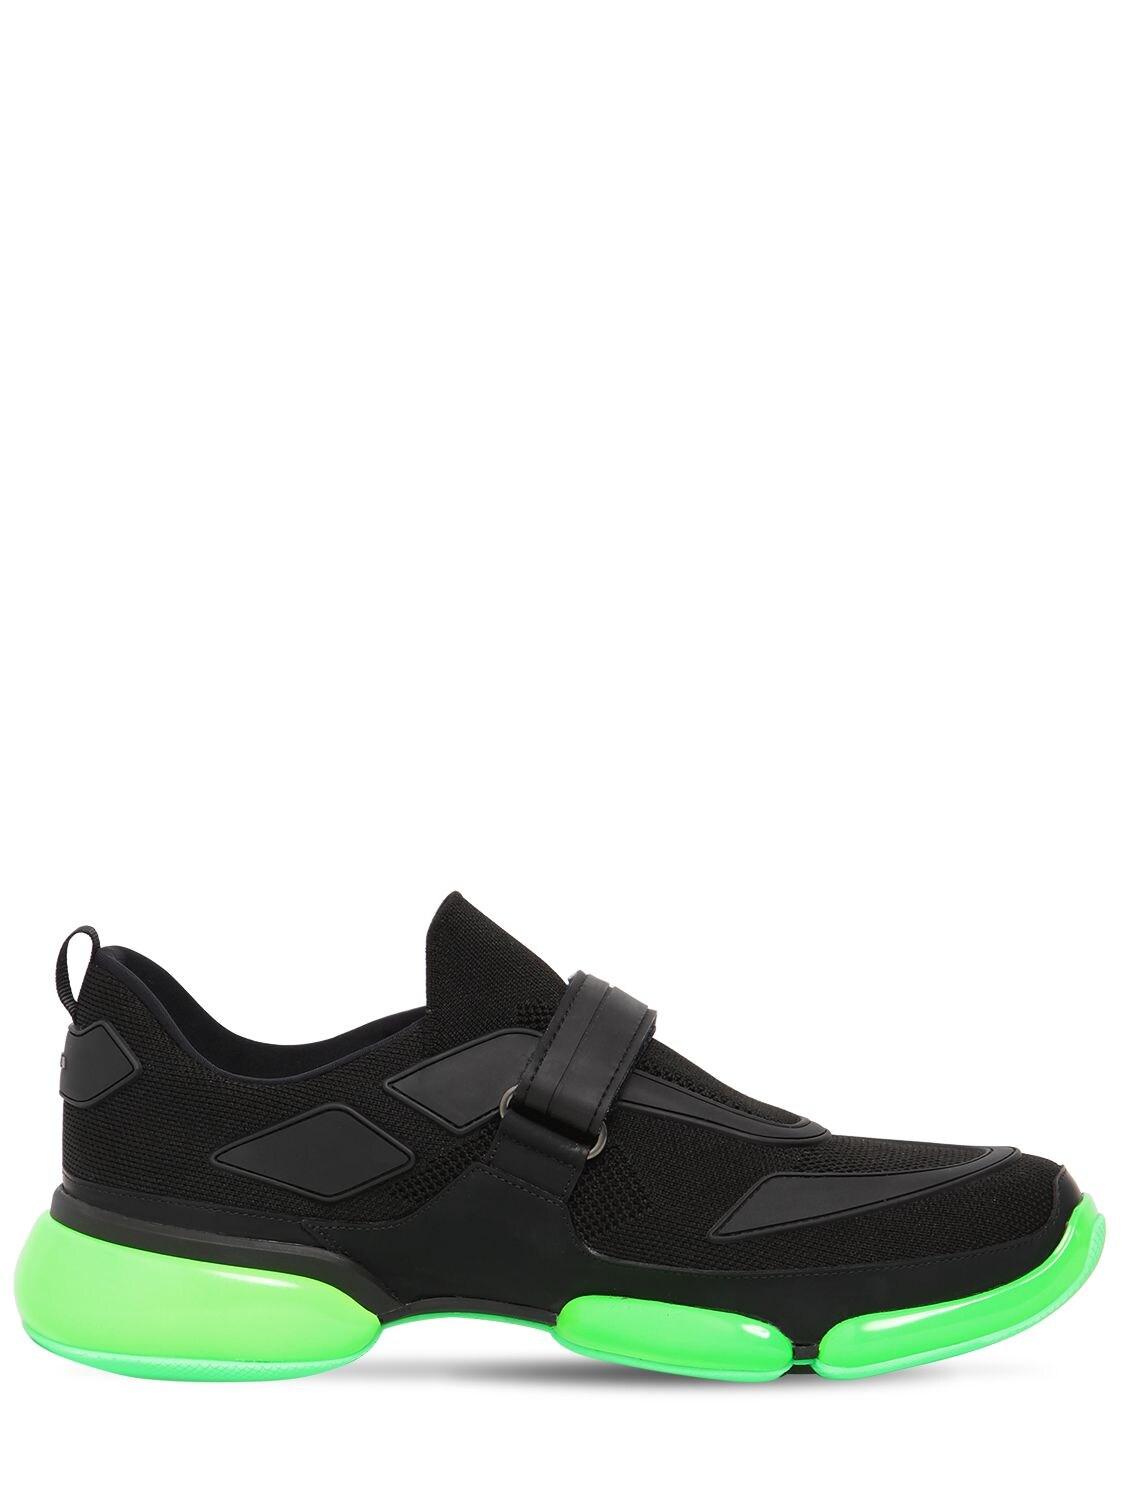 Prada Leather Black And Green Cloudbust Sneakers for Men | Lyst